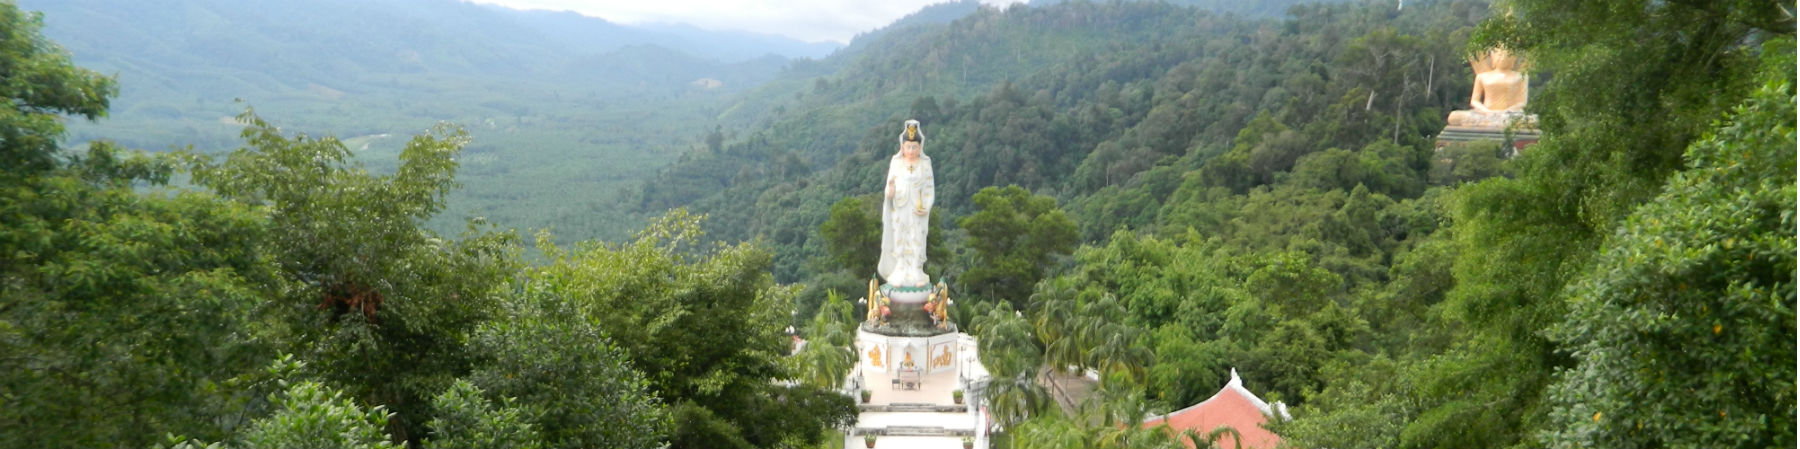 The Statue of Kwam Im, the Chinese Goddess of Mercy at Wat Bang Riang, Tha Put District, Phang Nga Province